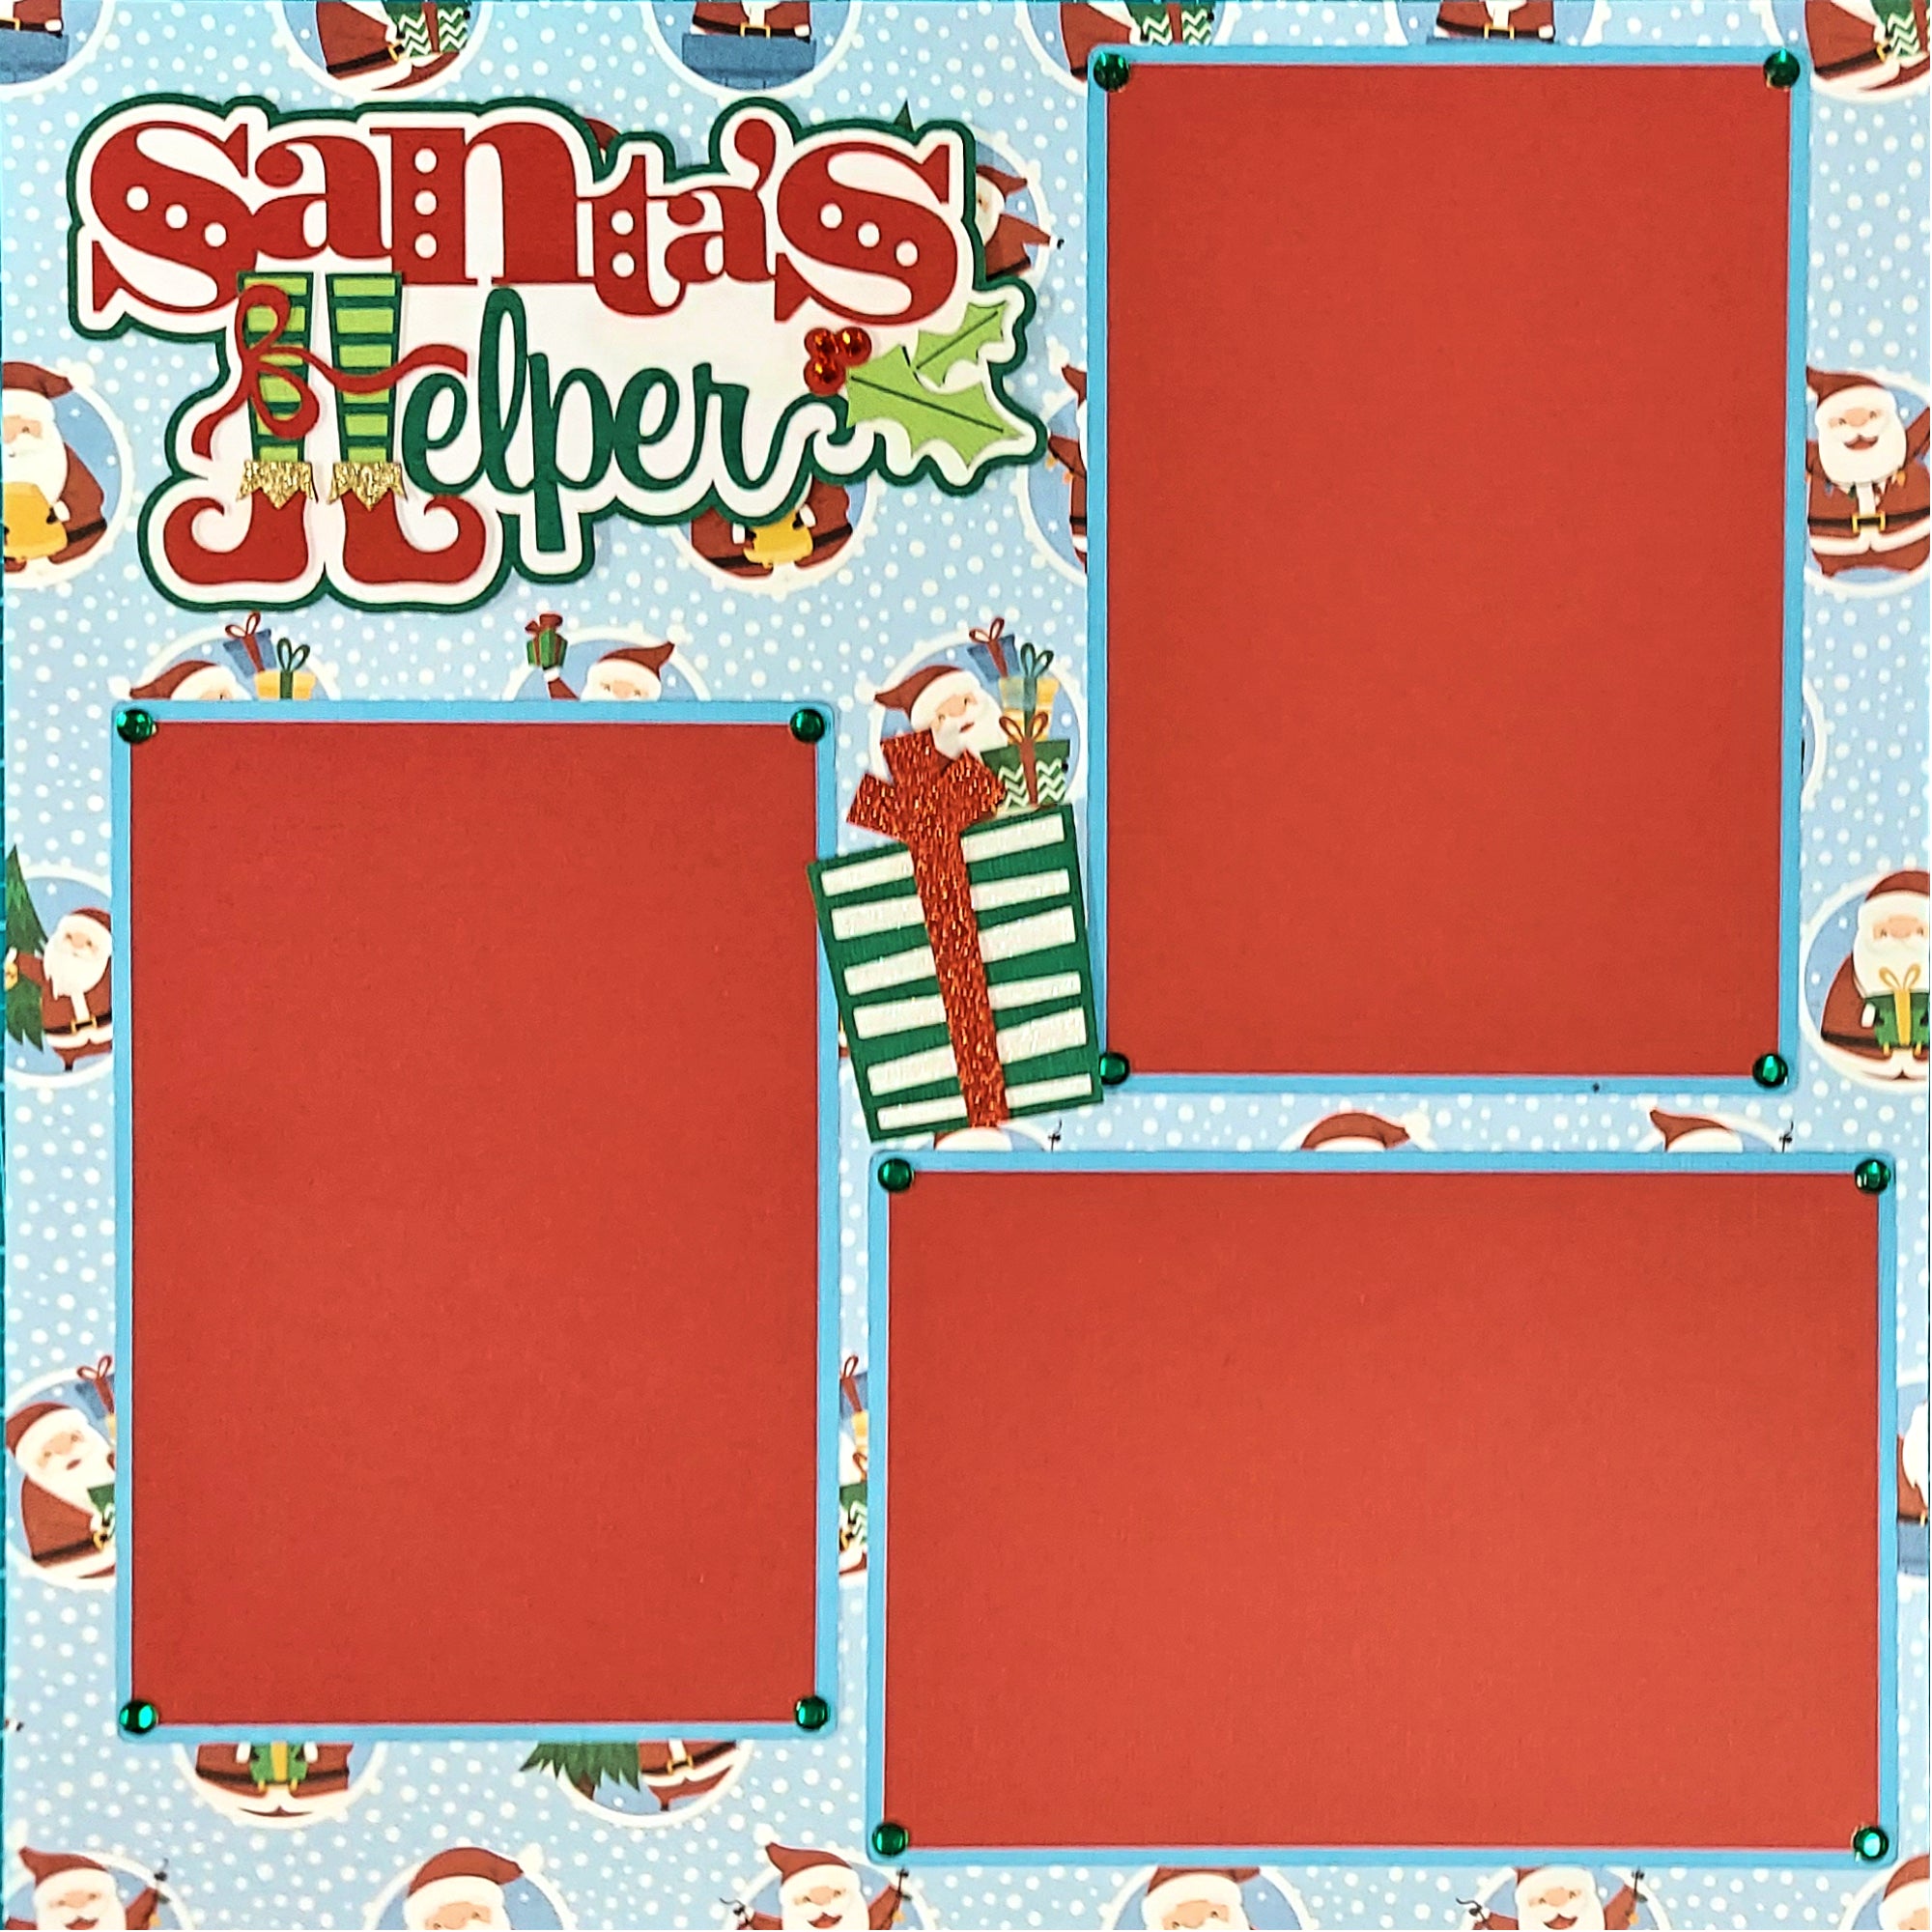 Santa's Helper (2) - 12 x 12 Pages, Fully-Assembled & Hand-Crafted 3D Scrapbook Premade by SSC Designs